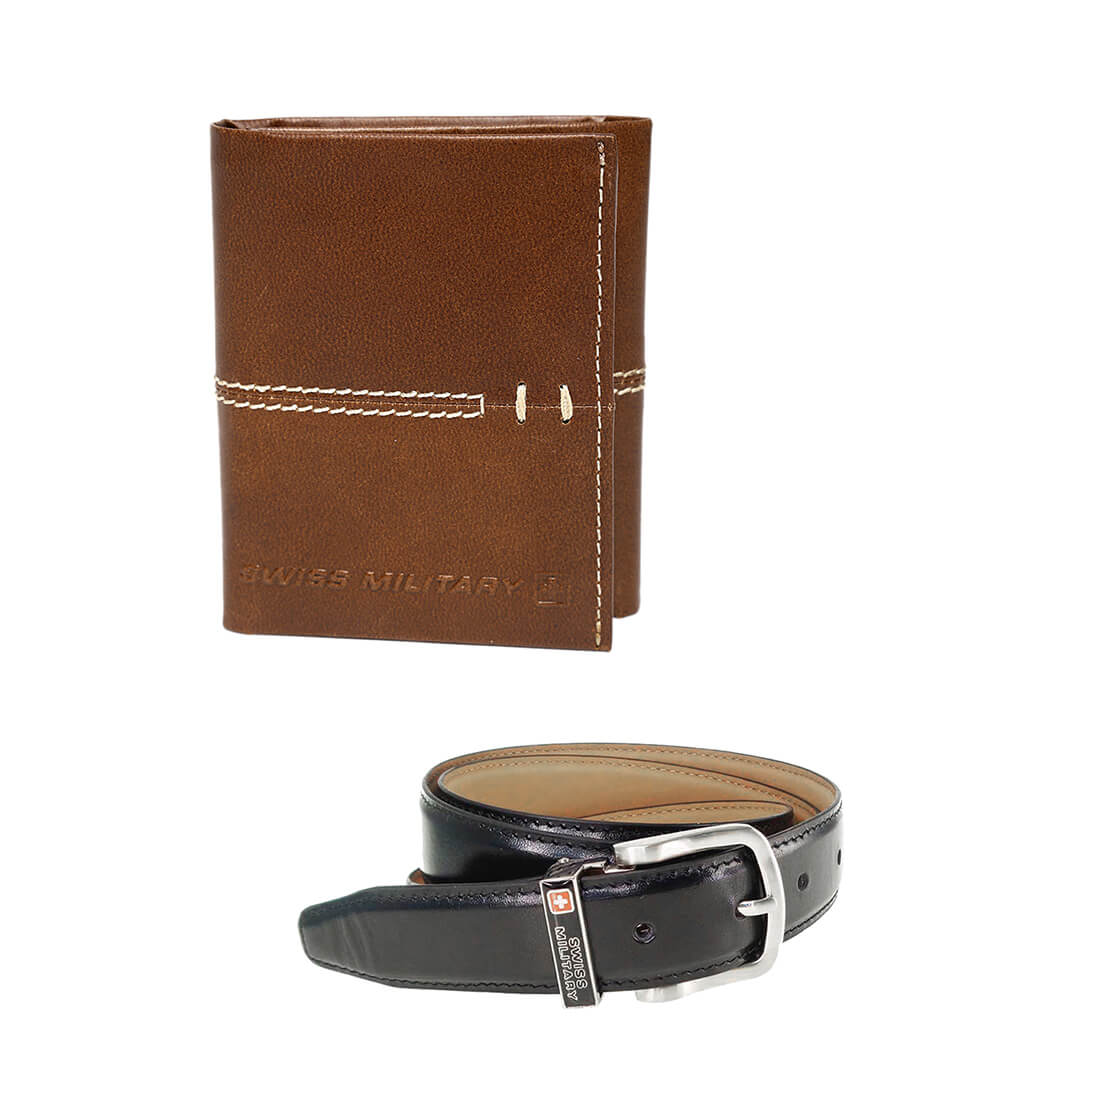 Gift Set of Leather Wallets & Leather Belts Combo Pack (LW18+BLT12)